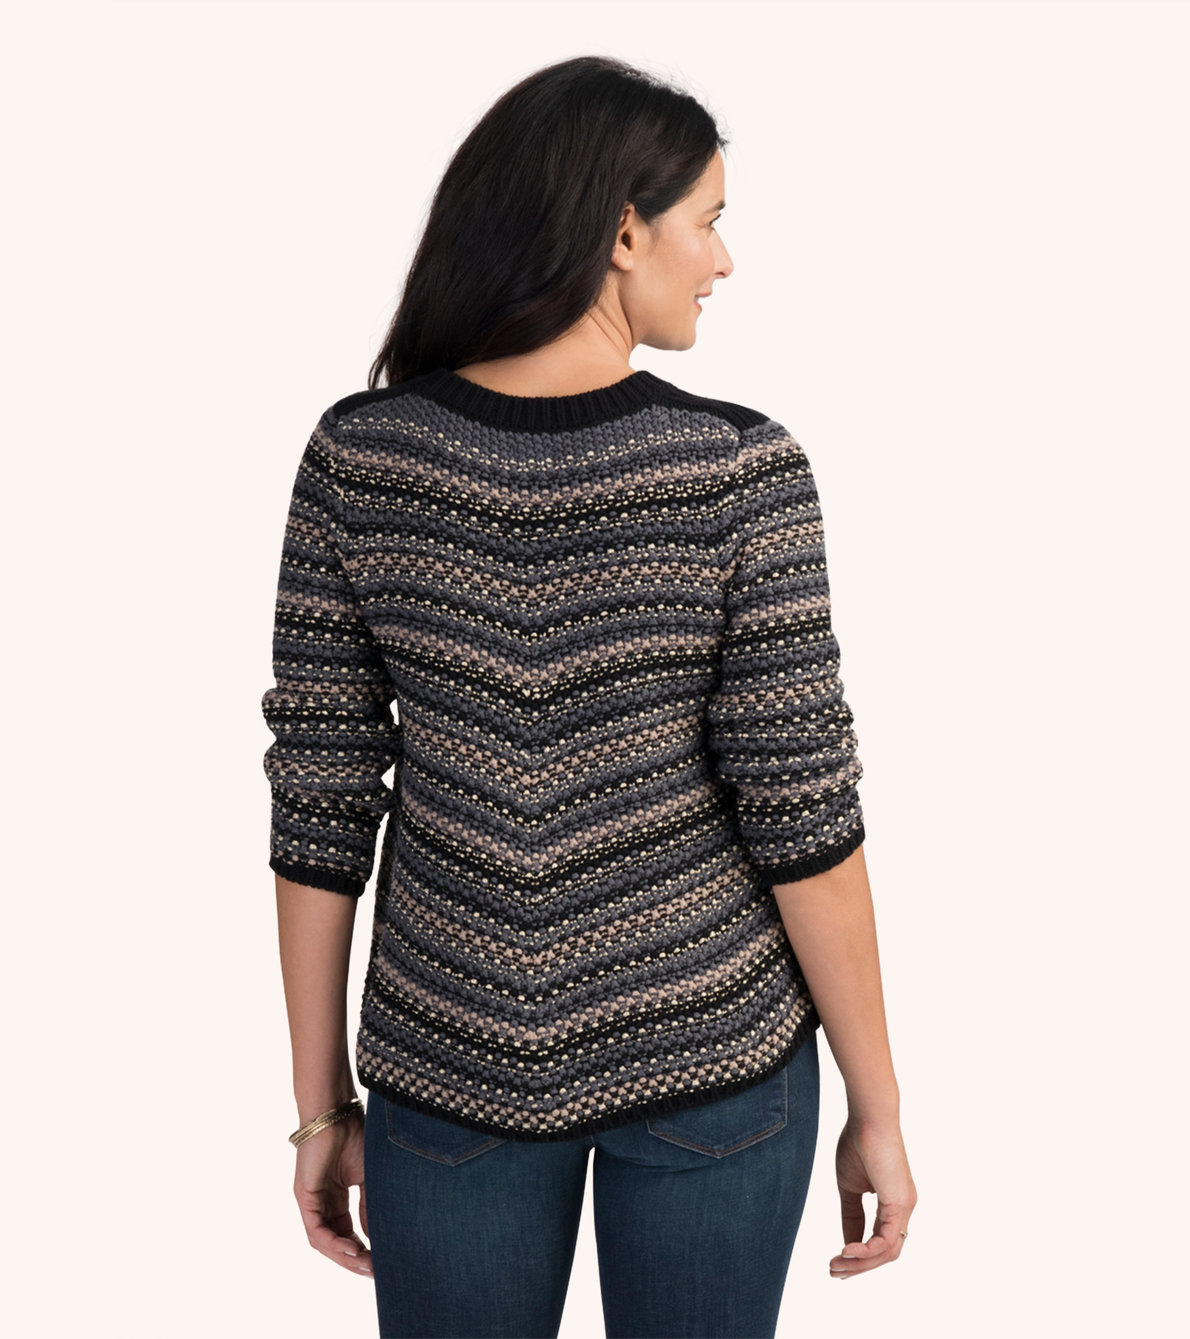 View larger image of Charcoal Chevron Stripes Chelsie Sweater